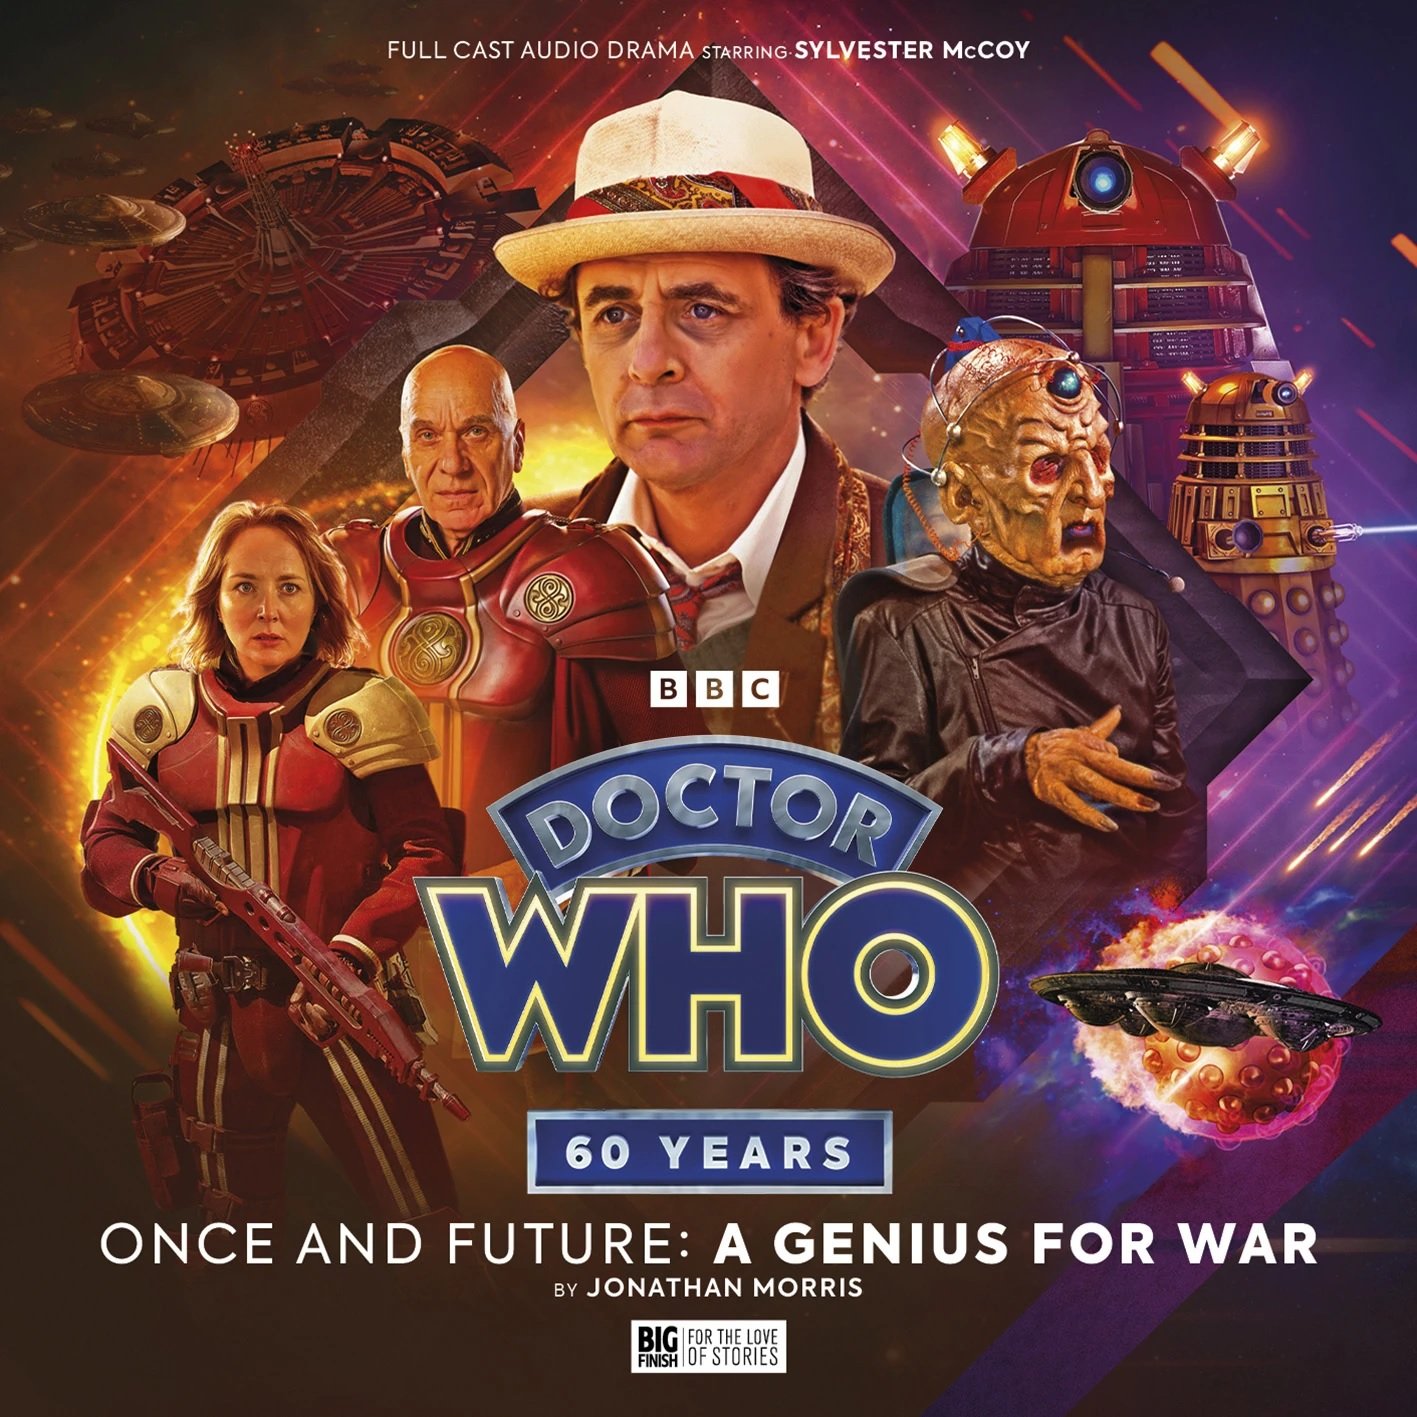 Big Finish Unveils Doctor Who 60th Anniversary Event, Once and Future: A Genius for War